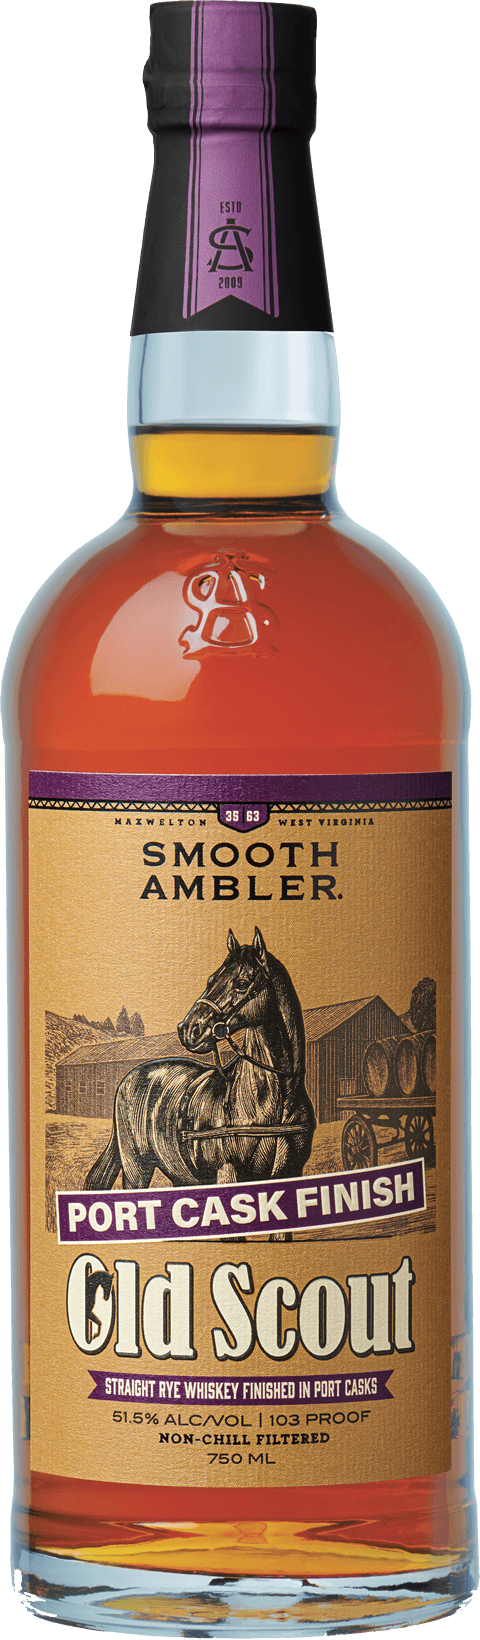 Smooth Ambler Old Scout Port Cask Finish Straight Rye Whiskey Bottle